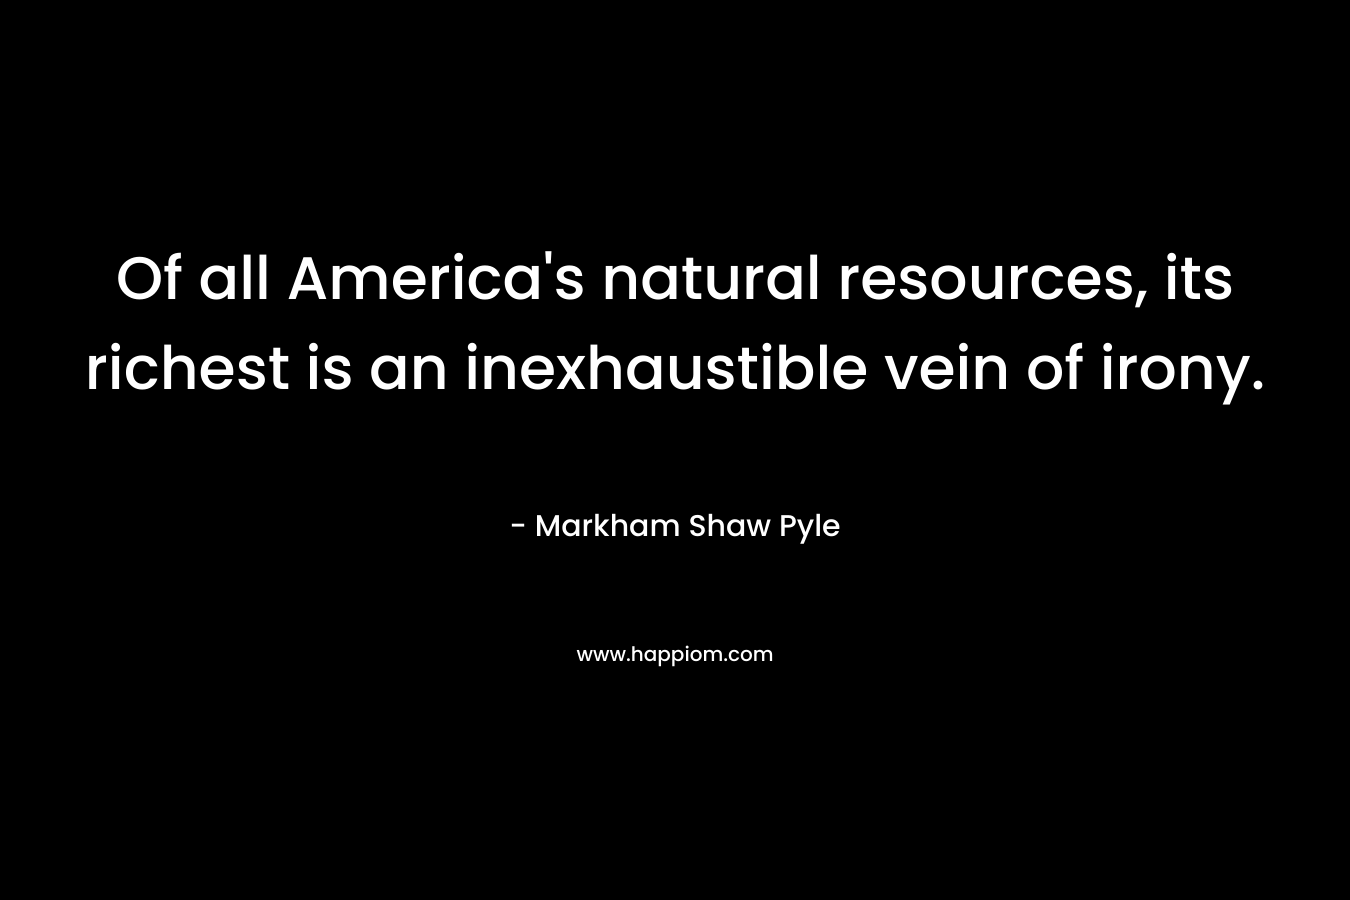 Of all America’s natural resources, its richest is an inexhaustible vein of irony. – Markham Shaw Pyle